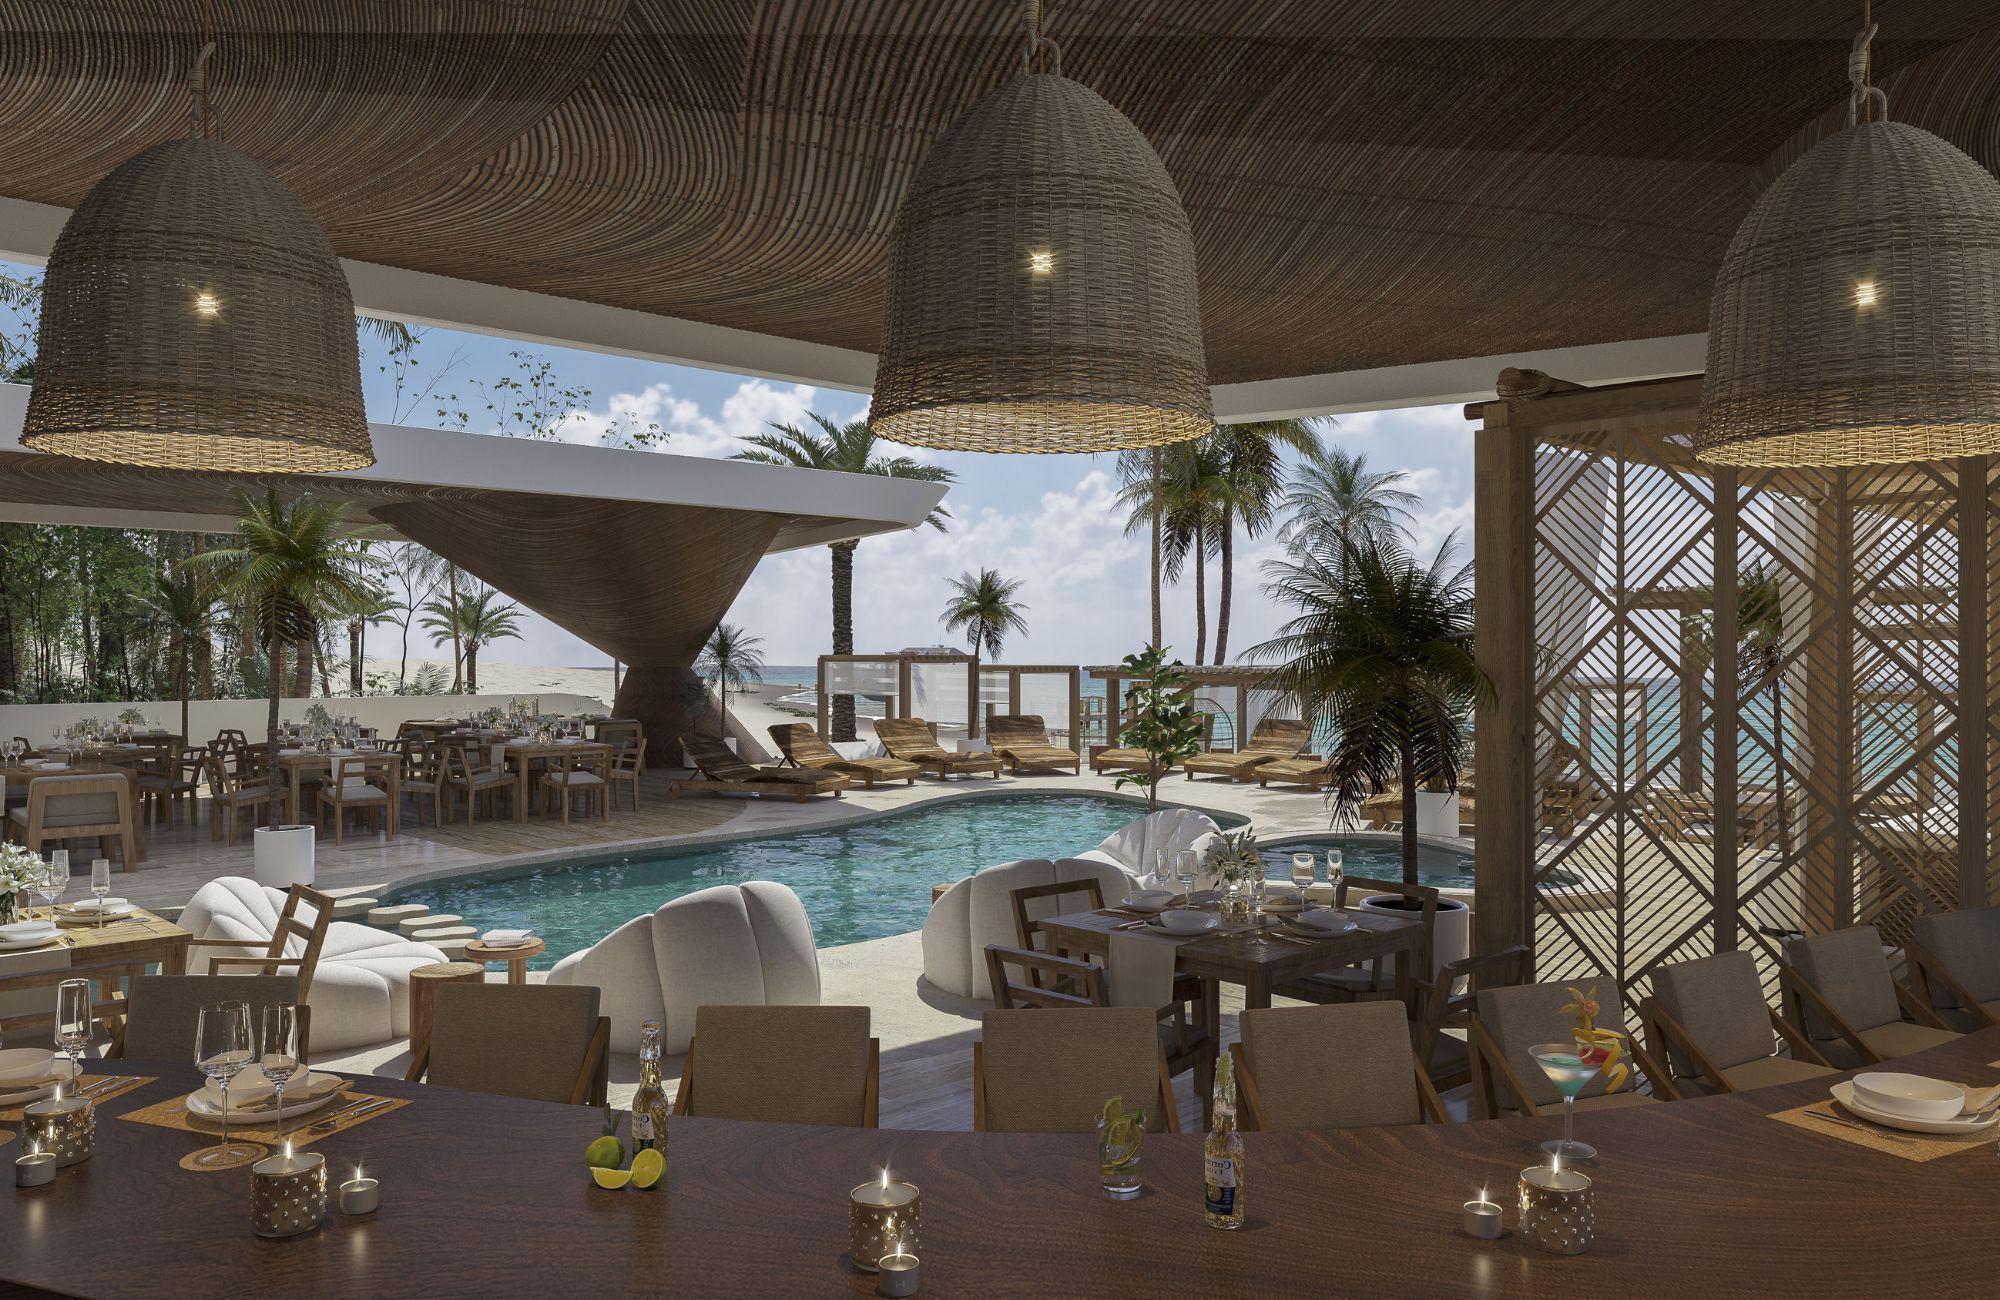 Condo with panoramic view, infinity pool, jacuzzi, snack bar, service room, pre-construction, in Puerto Cancun.